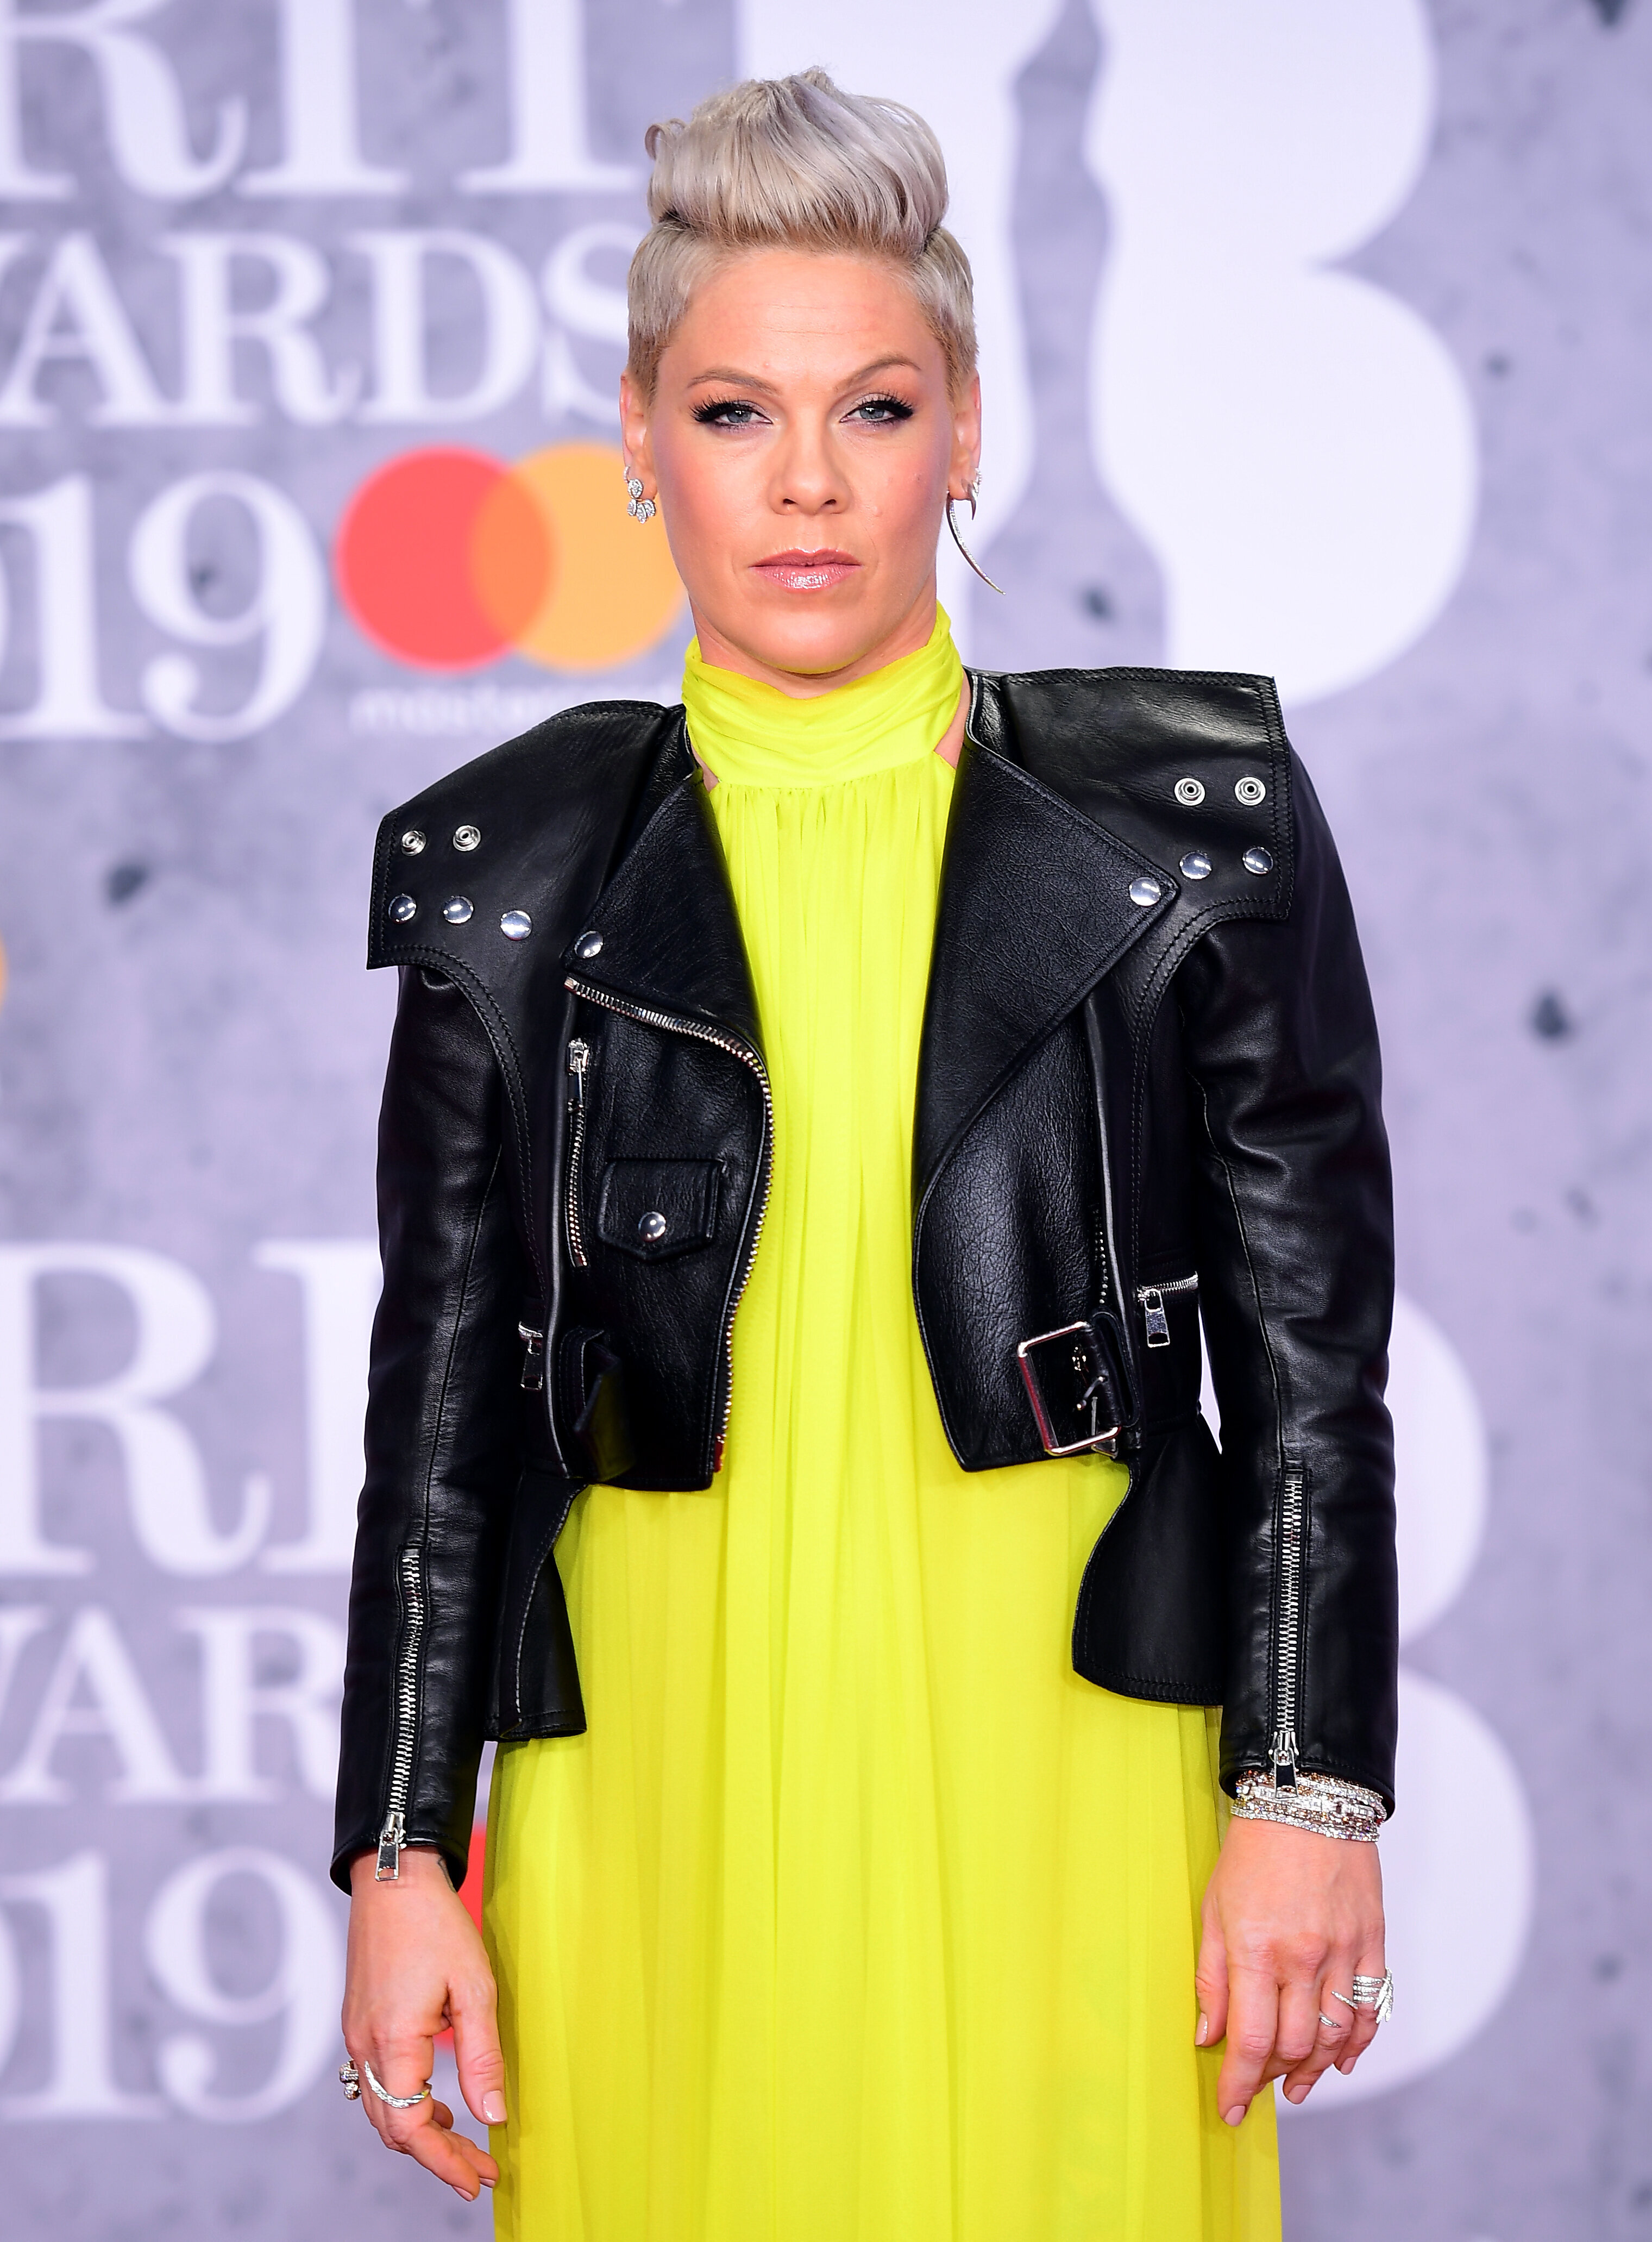 Pink Defends Photo Of Kids Running In Holocaust Memorial As 'Celebration Of Life'